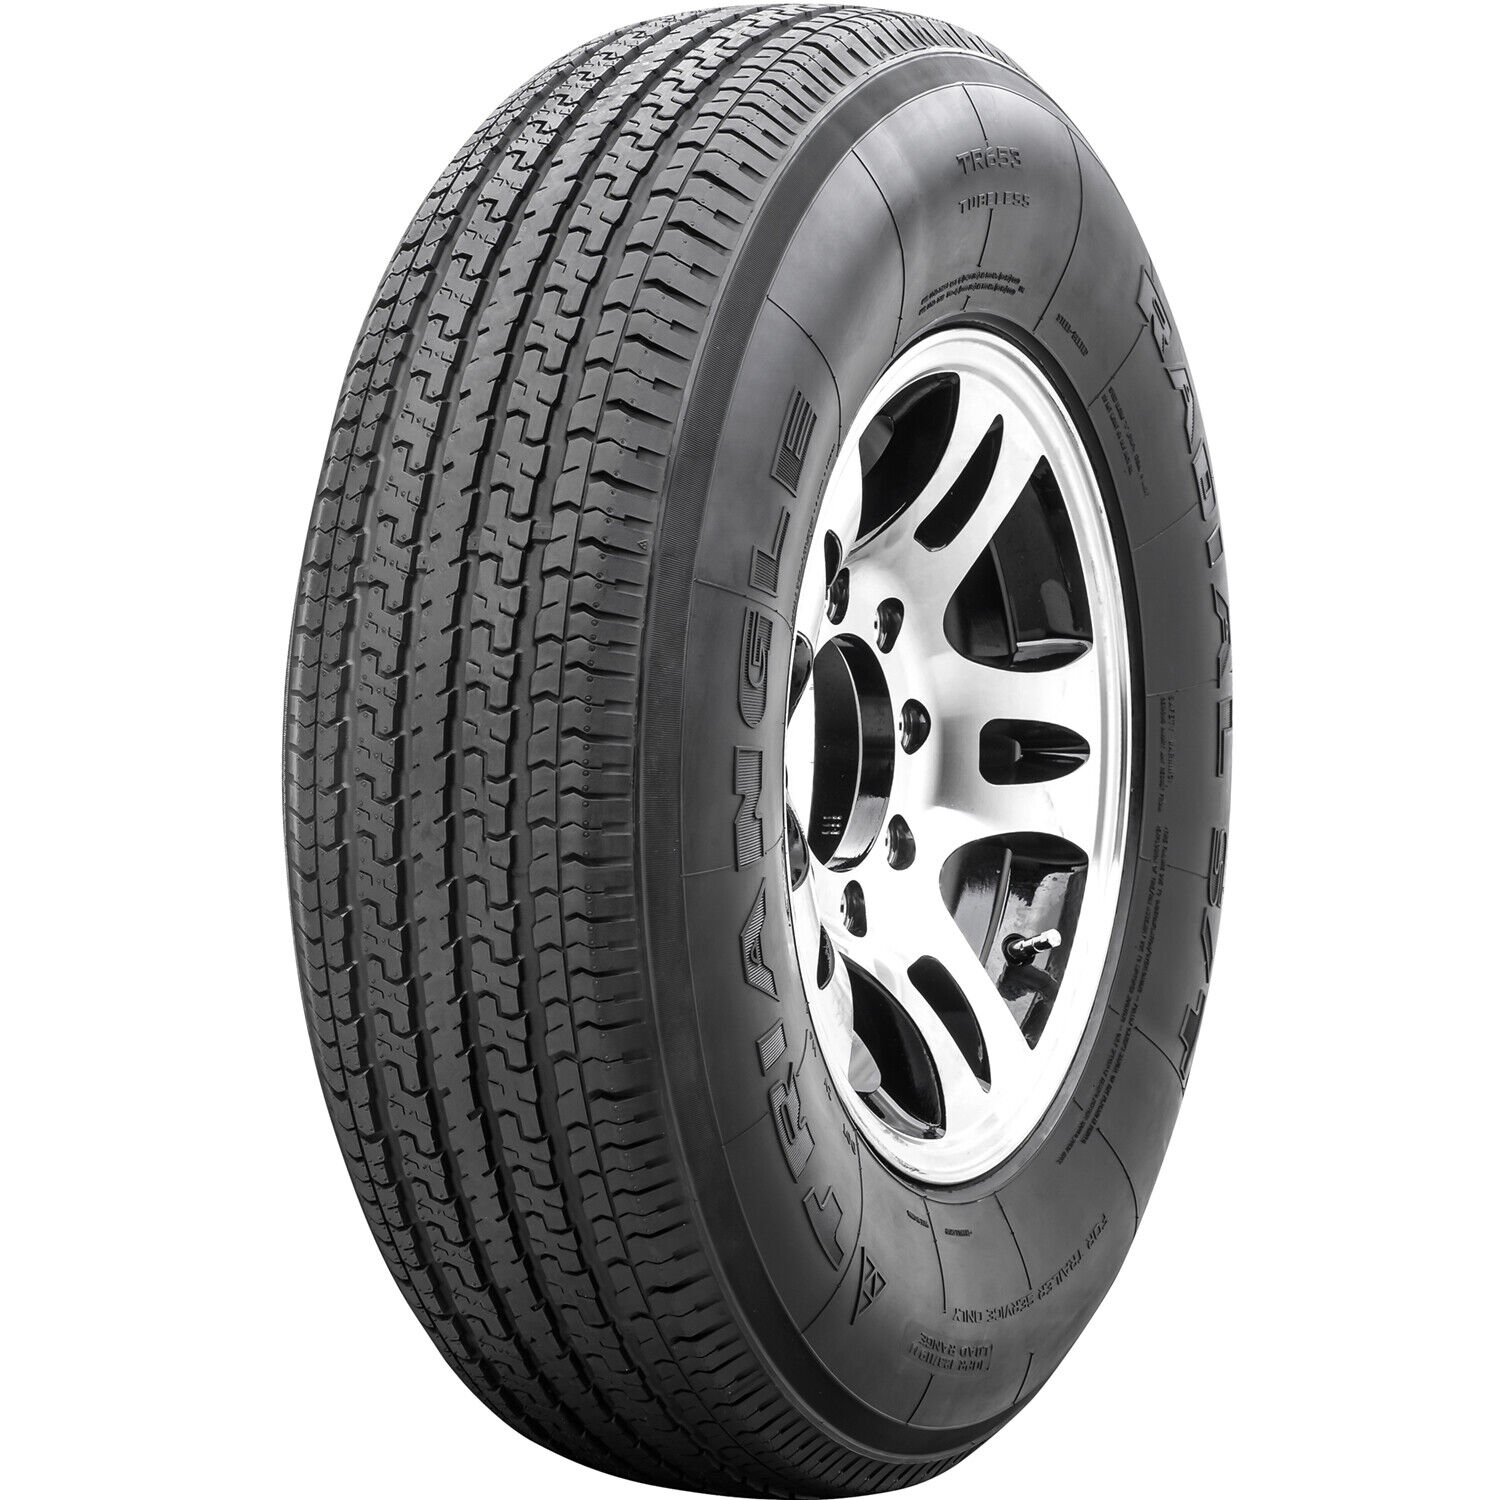 Tire Triangle TR653 ST 205/75R15 205-75-15 205/75/15 Load D 8 Ply Trailer